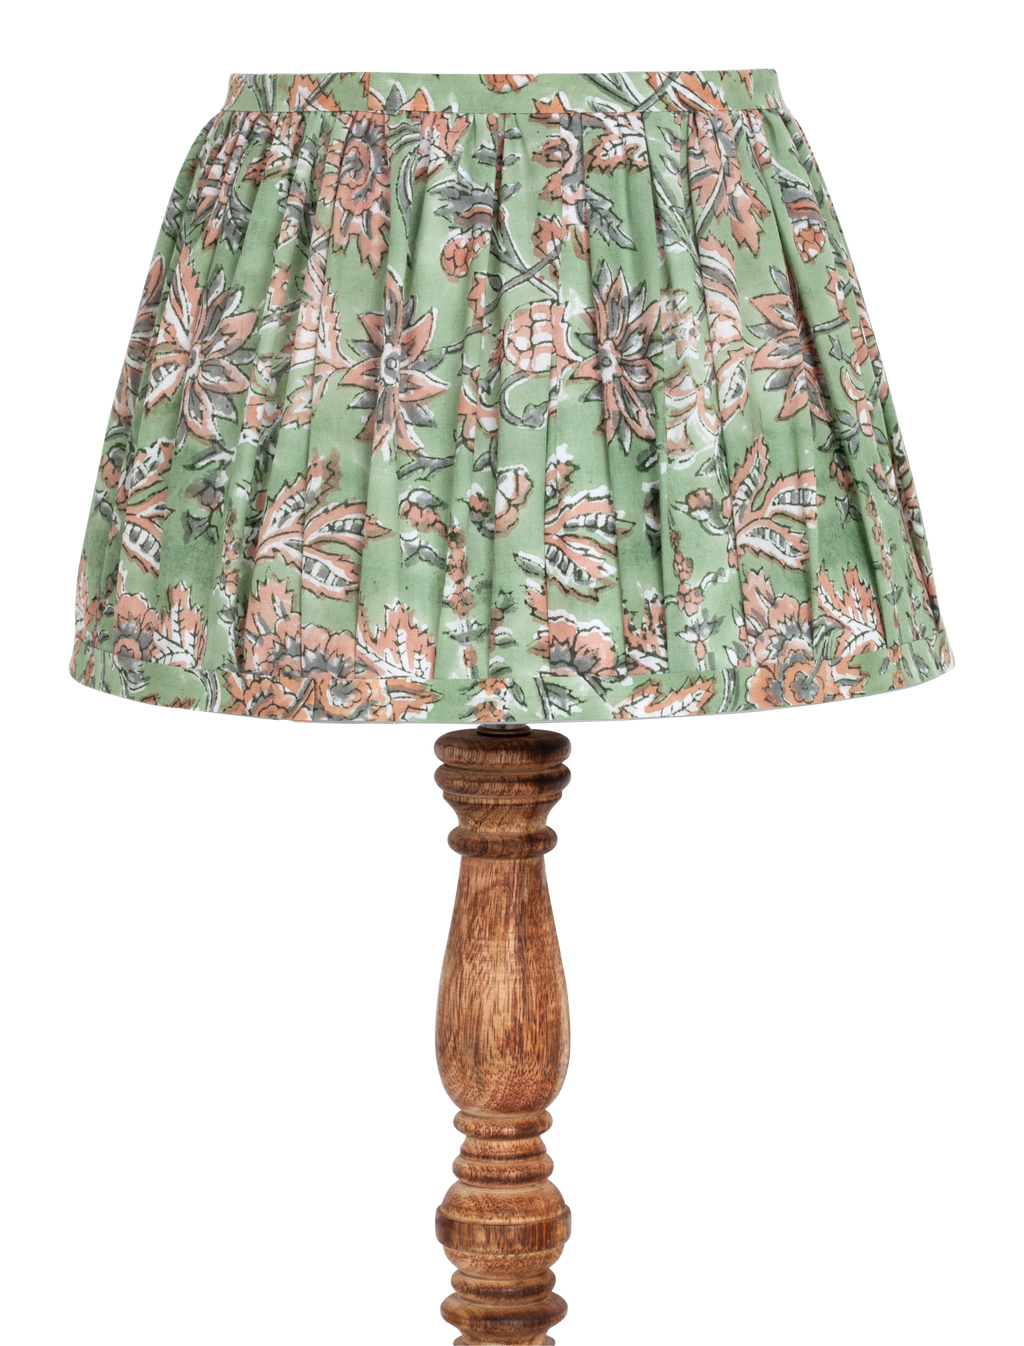 Lampshade with Indian Summer print in Green - Medium